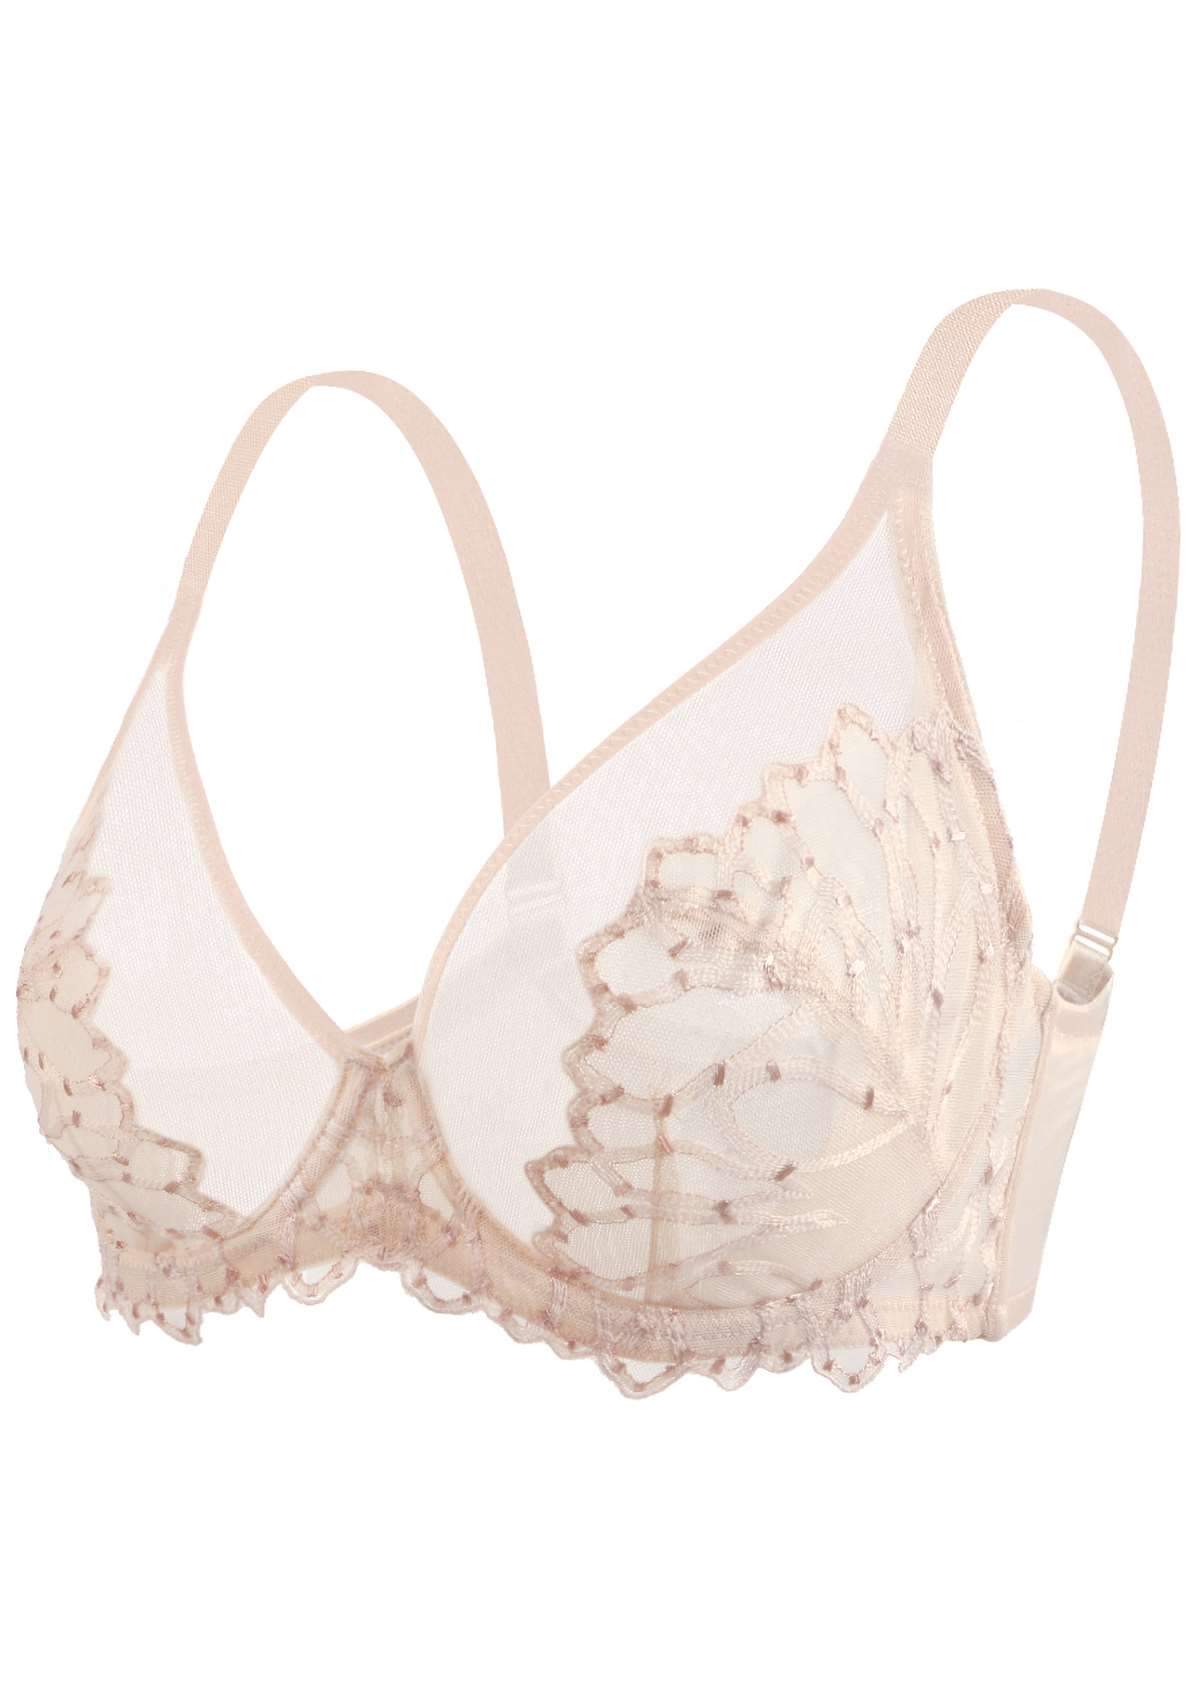 HSIA Chrysanthemum Plus Size Lace Bra: Back Support Bra For Posture - Light Pink / 34 / DD/E